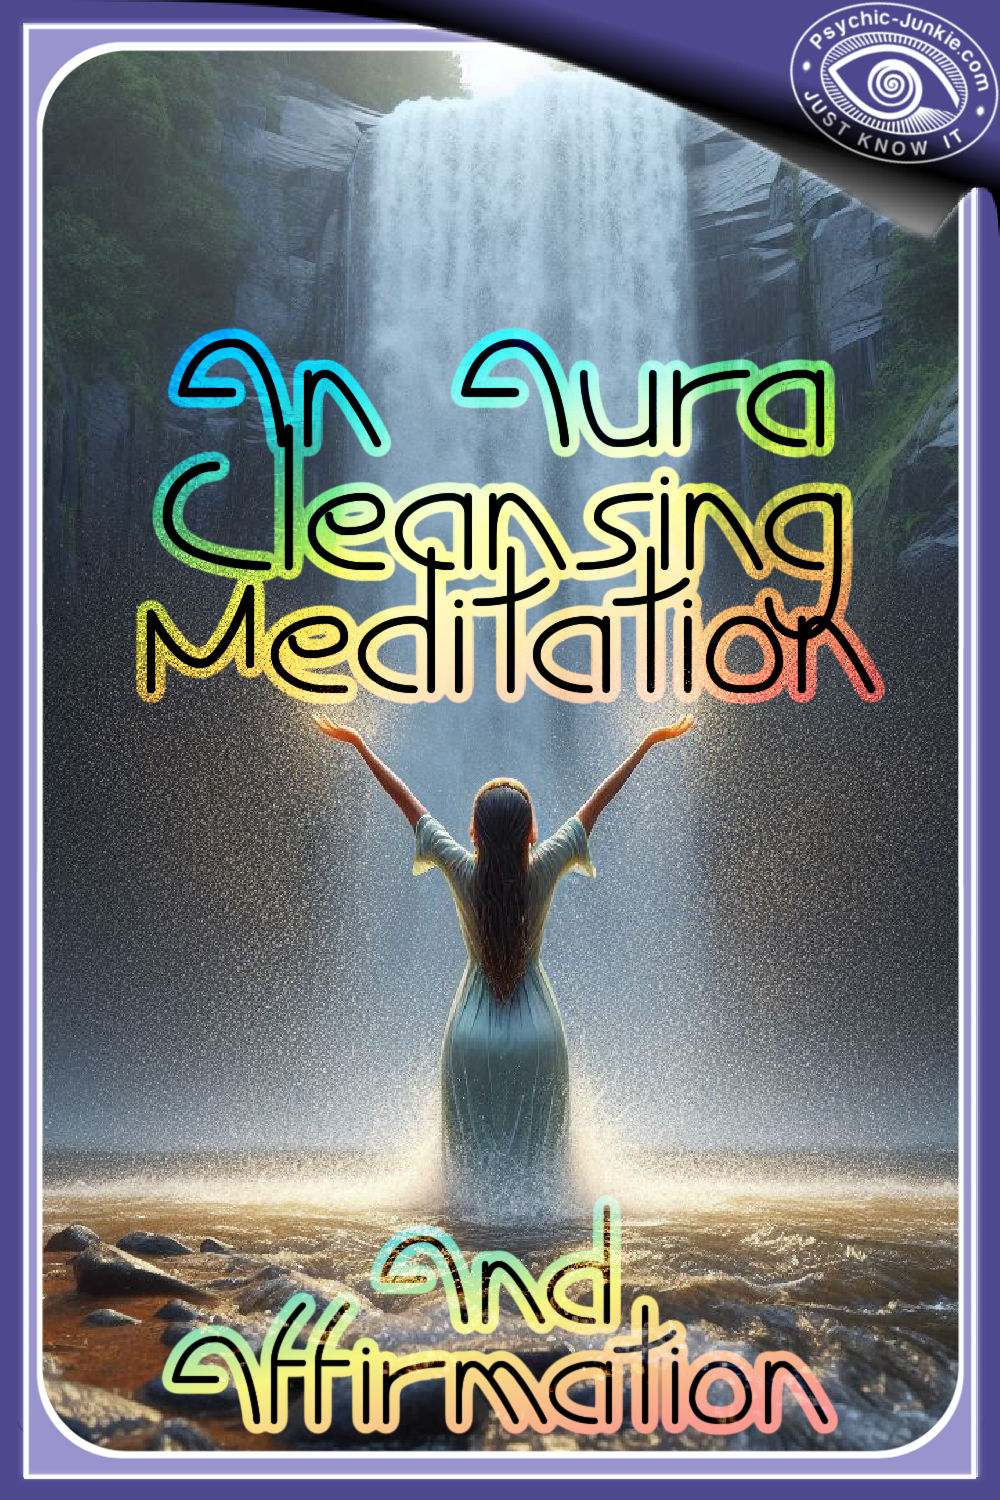 What Is An Aura Cleansing Meditation?